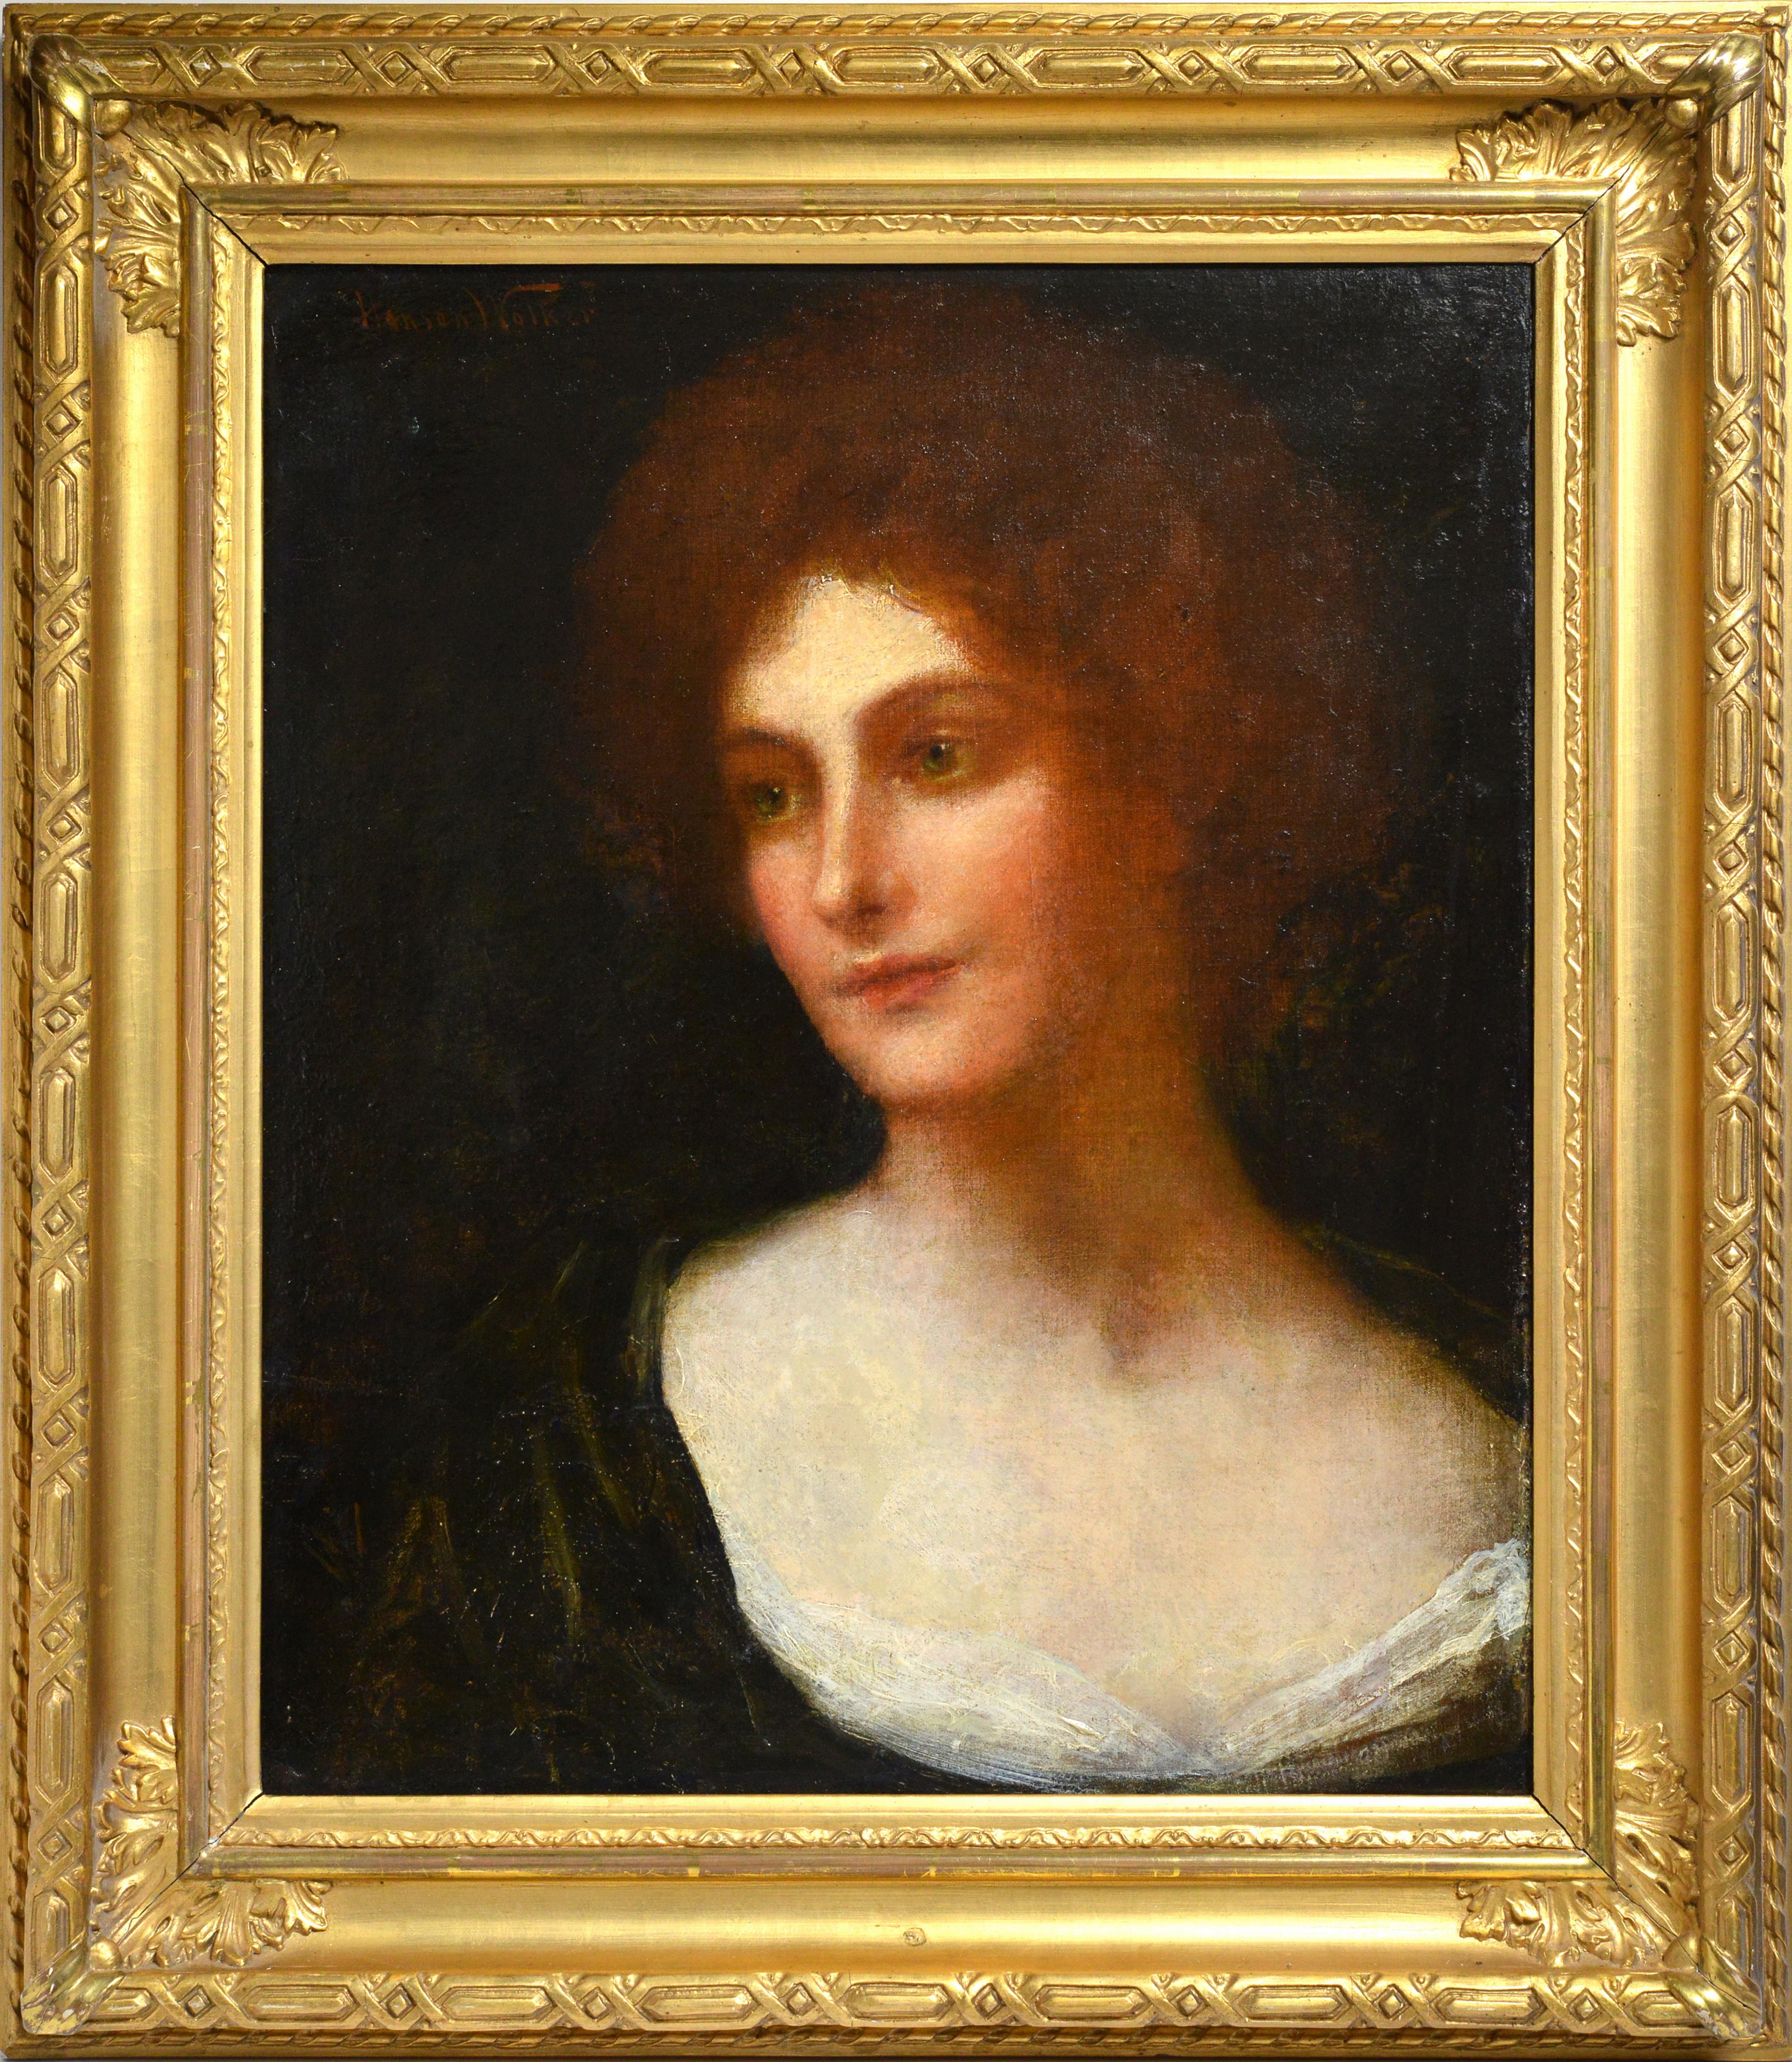 Portrait of Redhaired Lady with Emerald Eyes 19th century British Oil Painting